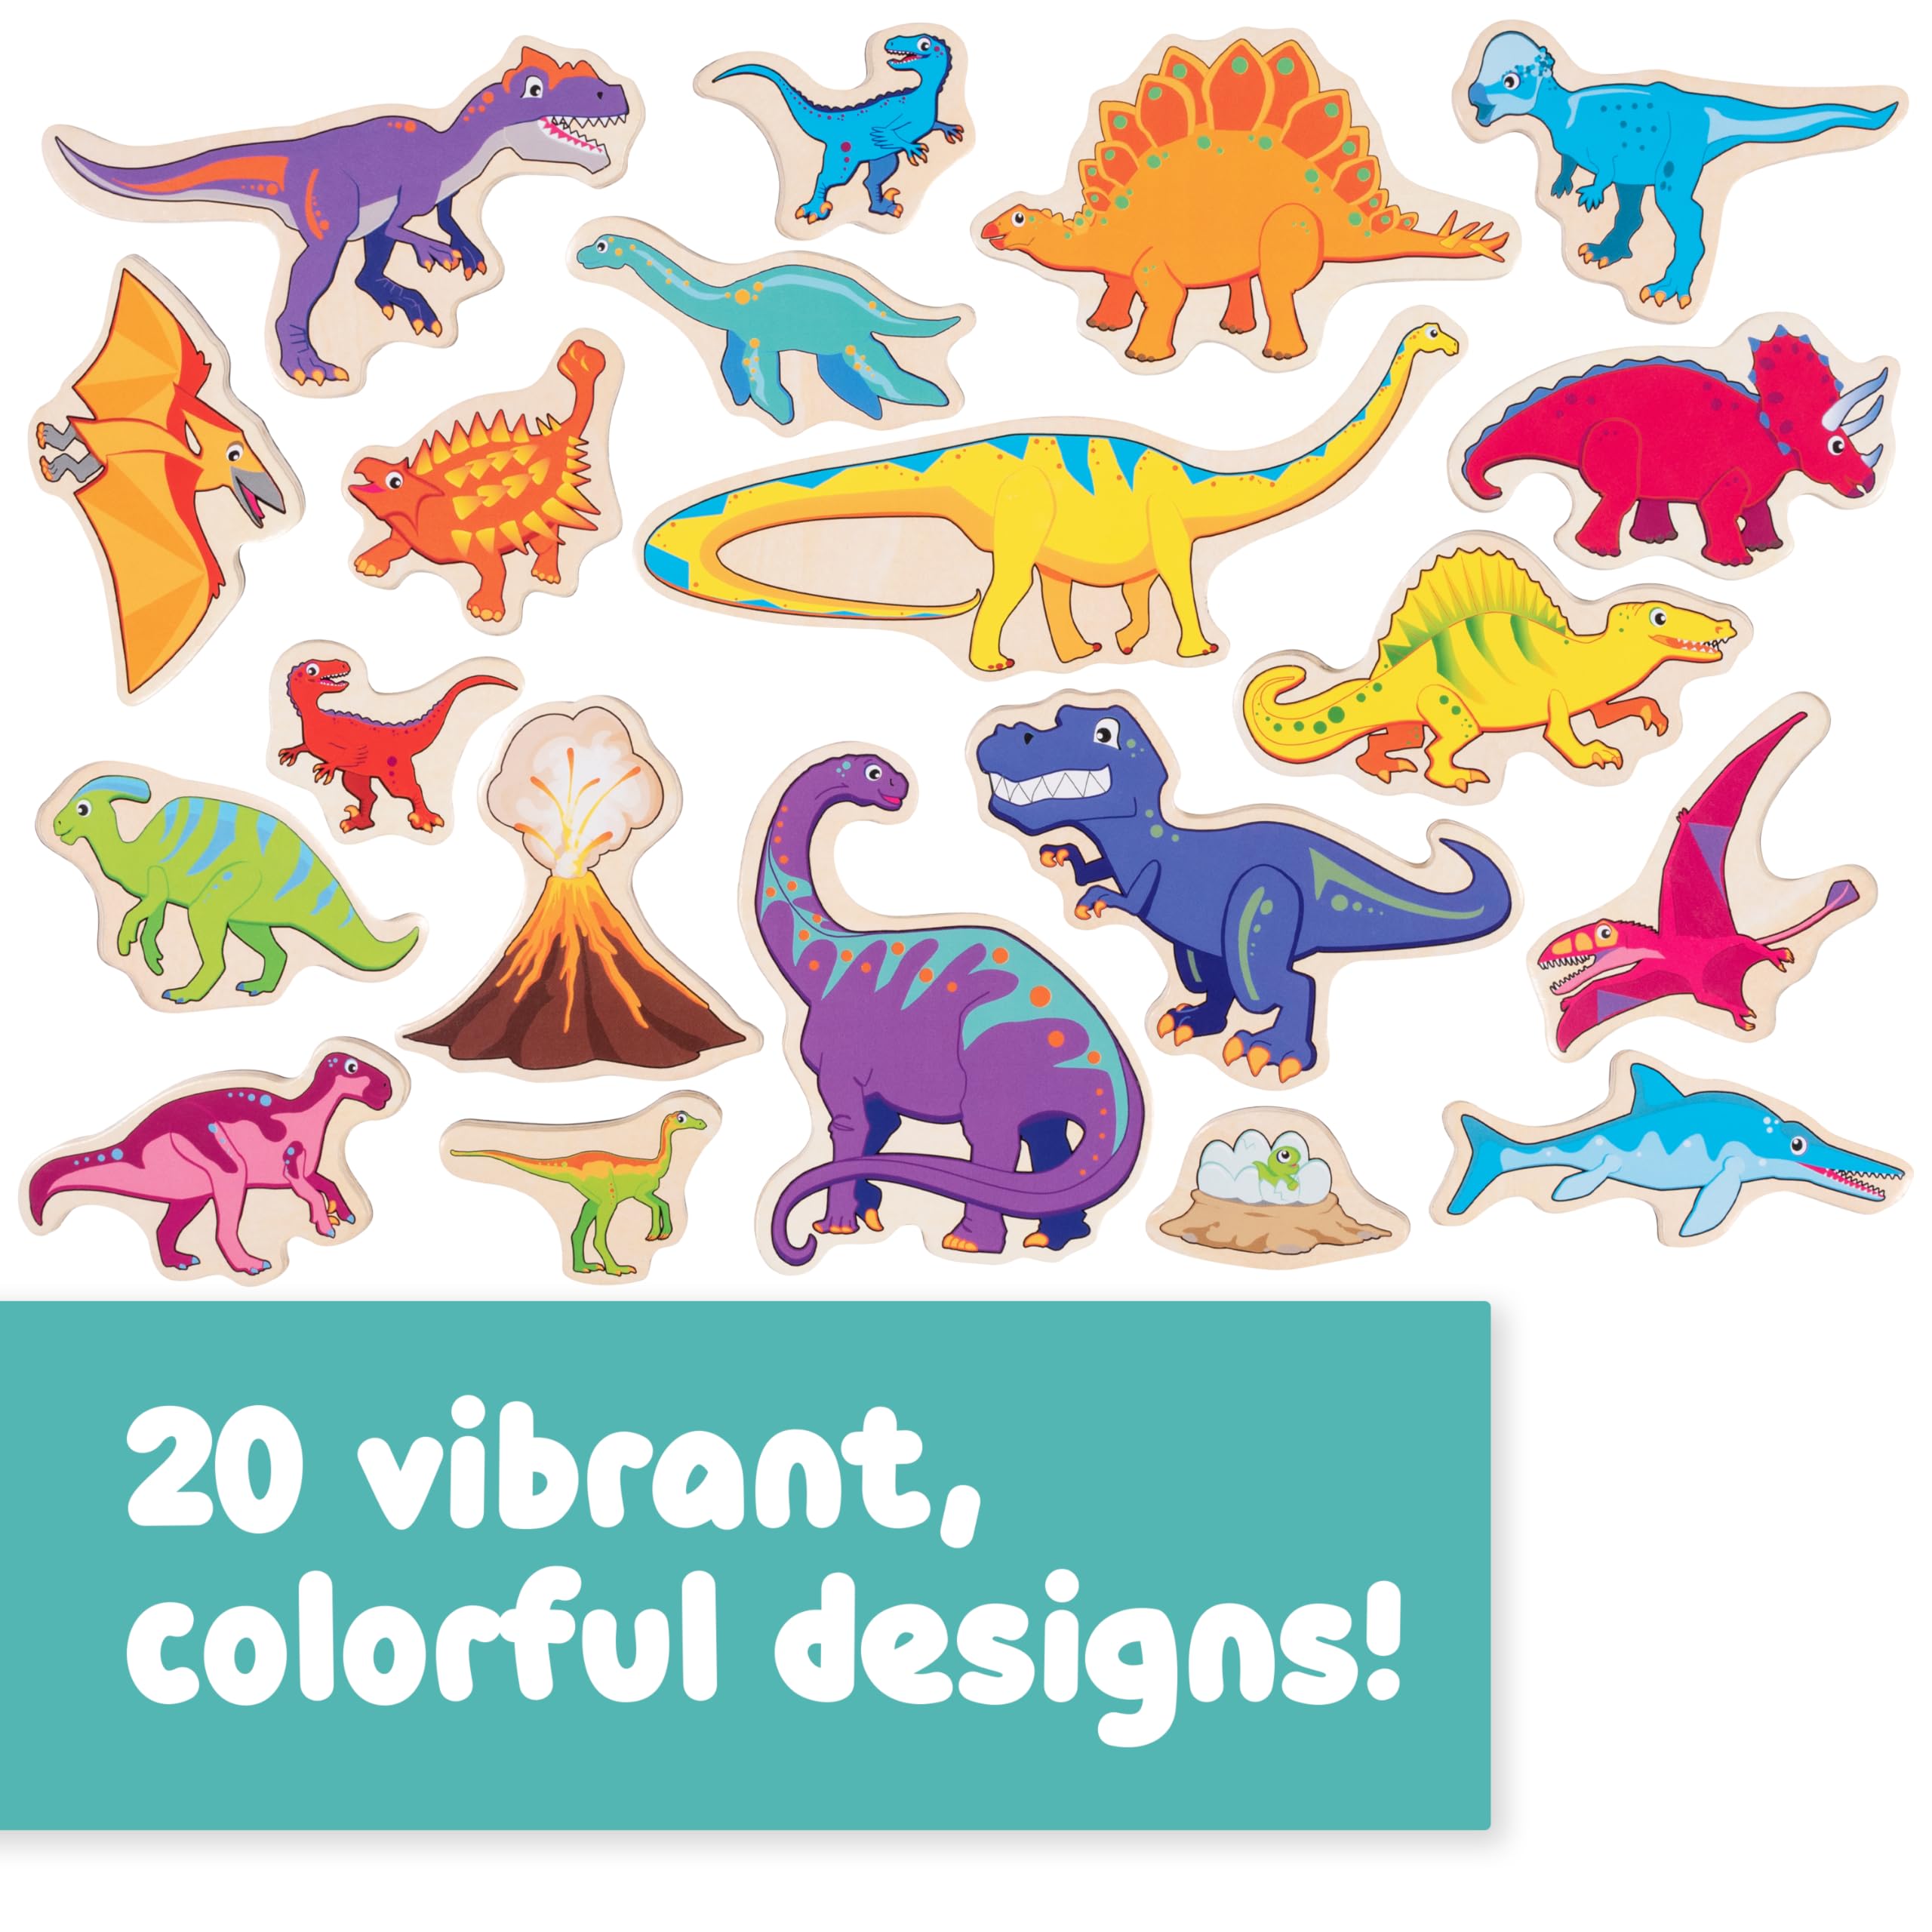 SPARK & WOW Wooden Magnets - Dinosaurs - Set of 20 - Magnets for Kids Ages 2+ - Cute Dinosaur Magnets for Fridges, Whiteboards and More